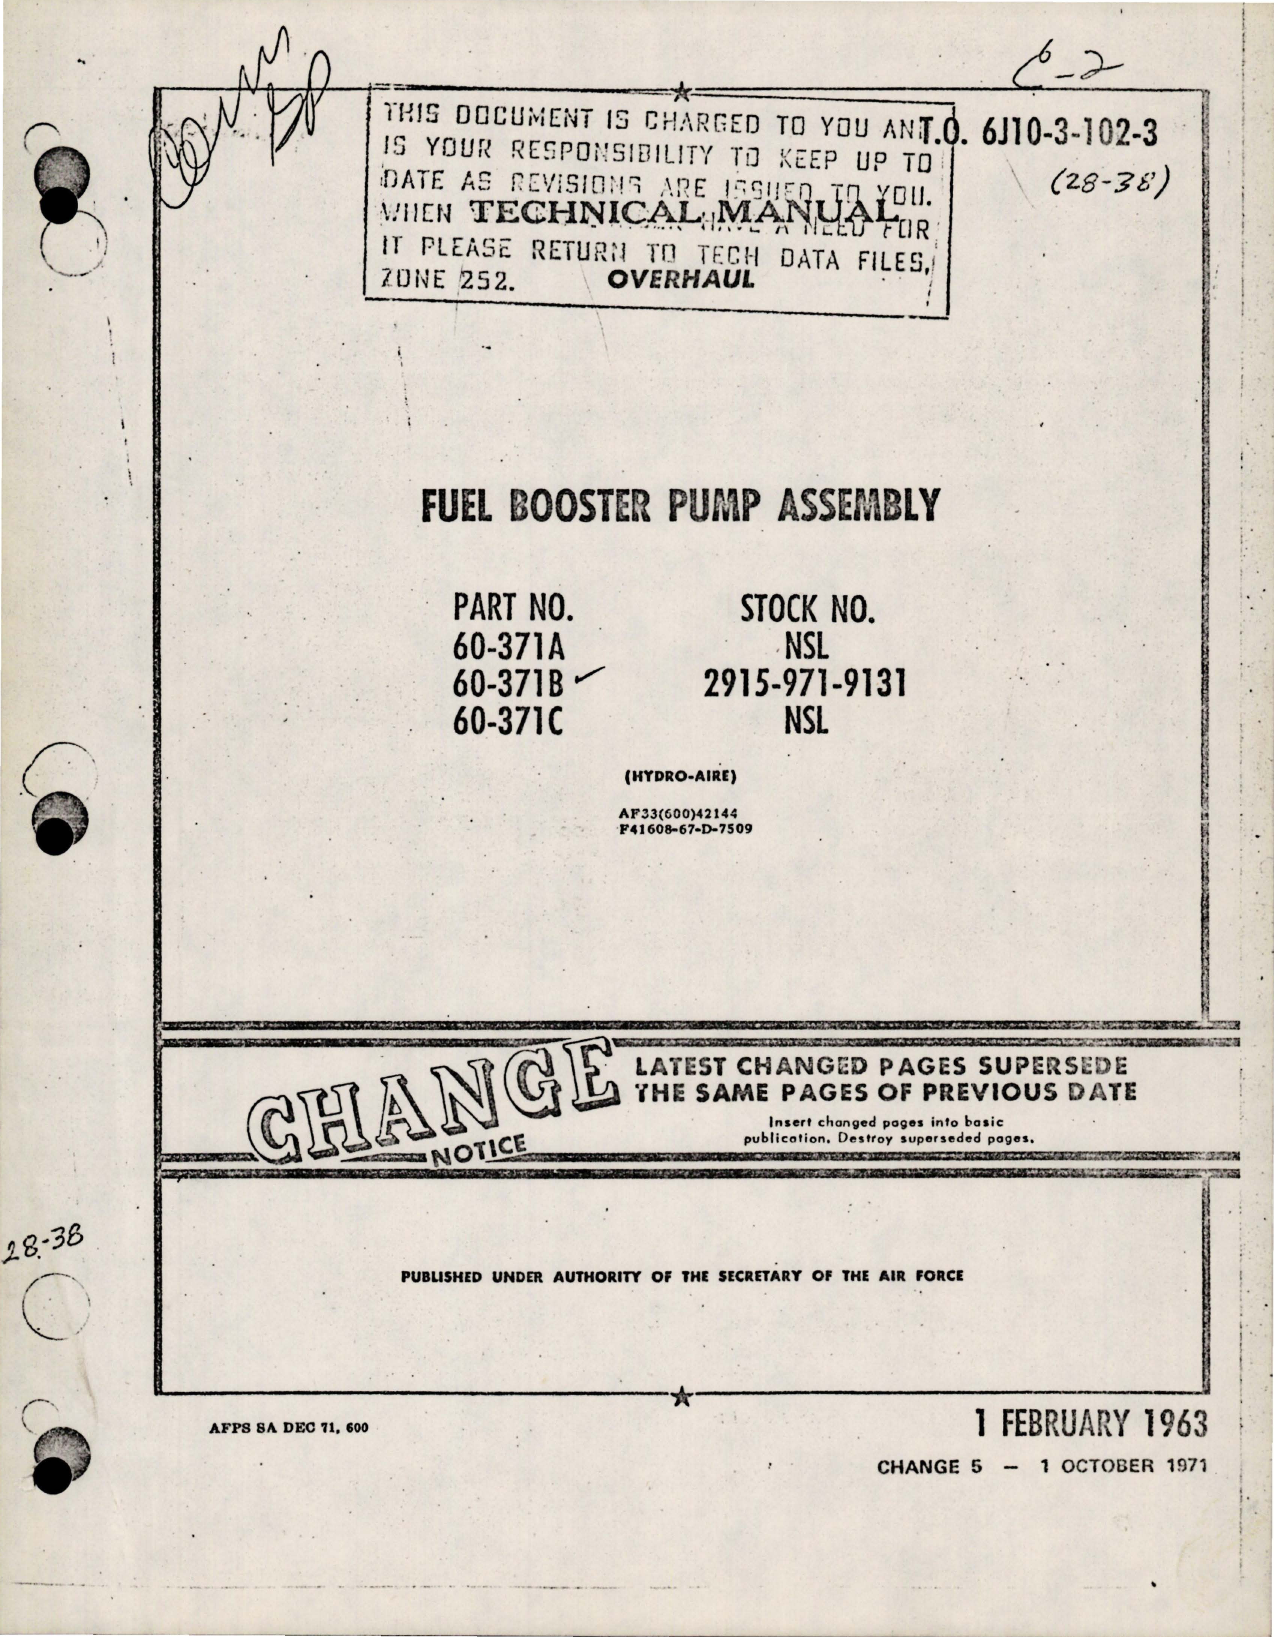 Sample page 1 from AirCorps Library document: Overhaul Manual for Fuel Booster Pump Assembly - Parts 60-371A, 60-371B, and 60-371C